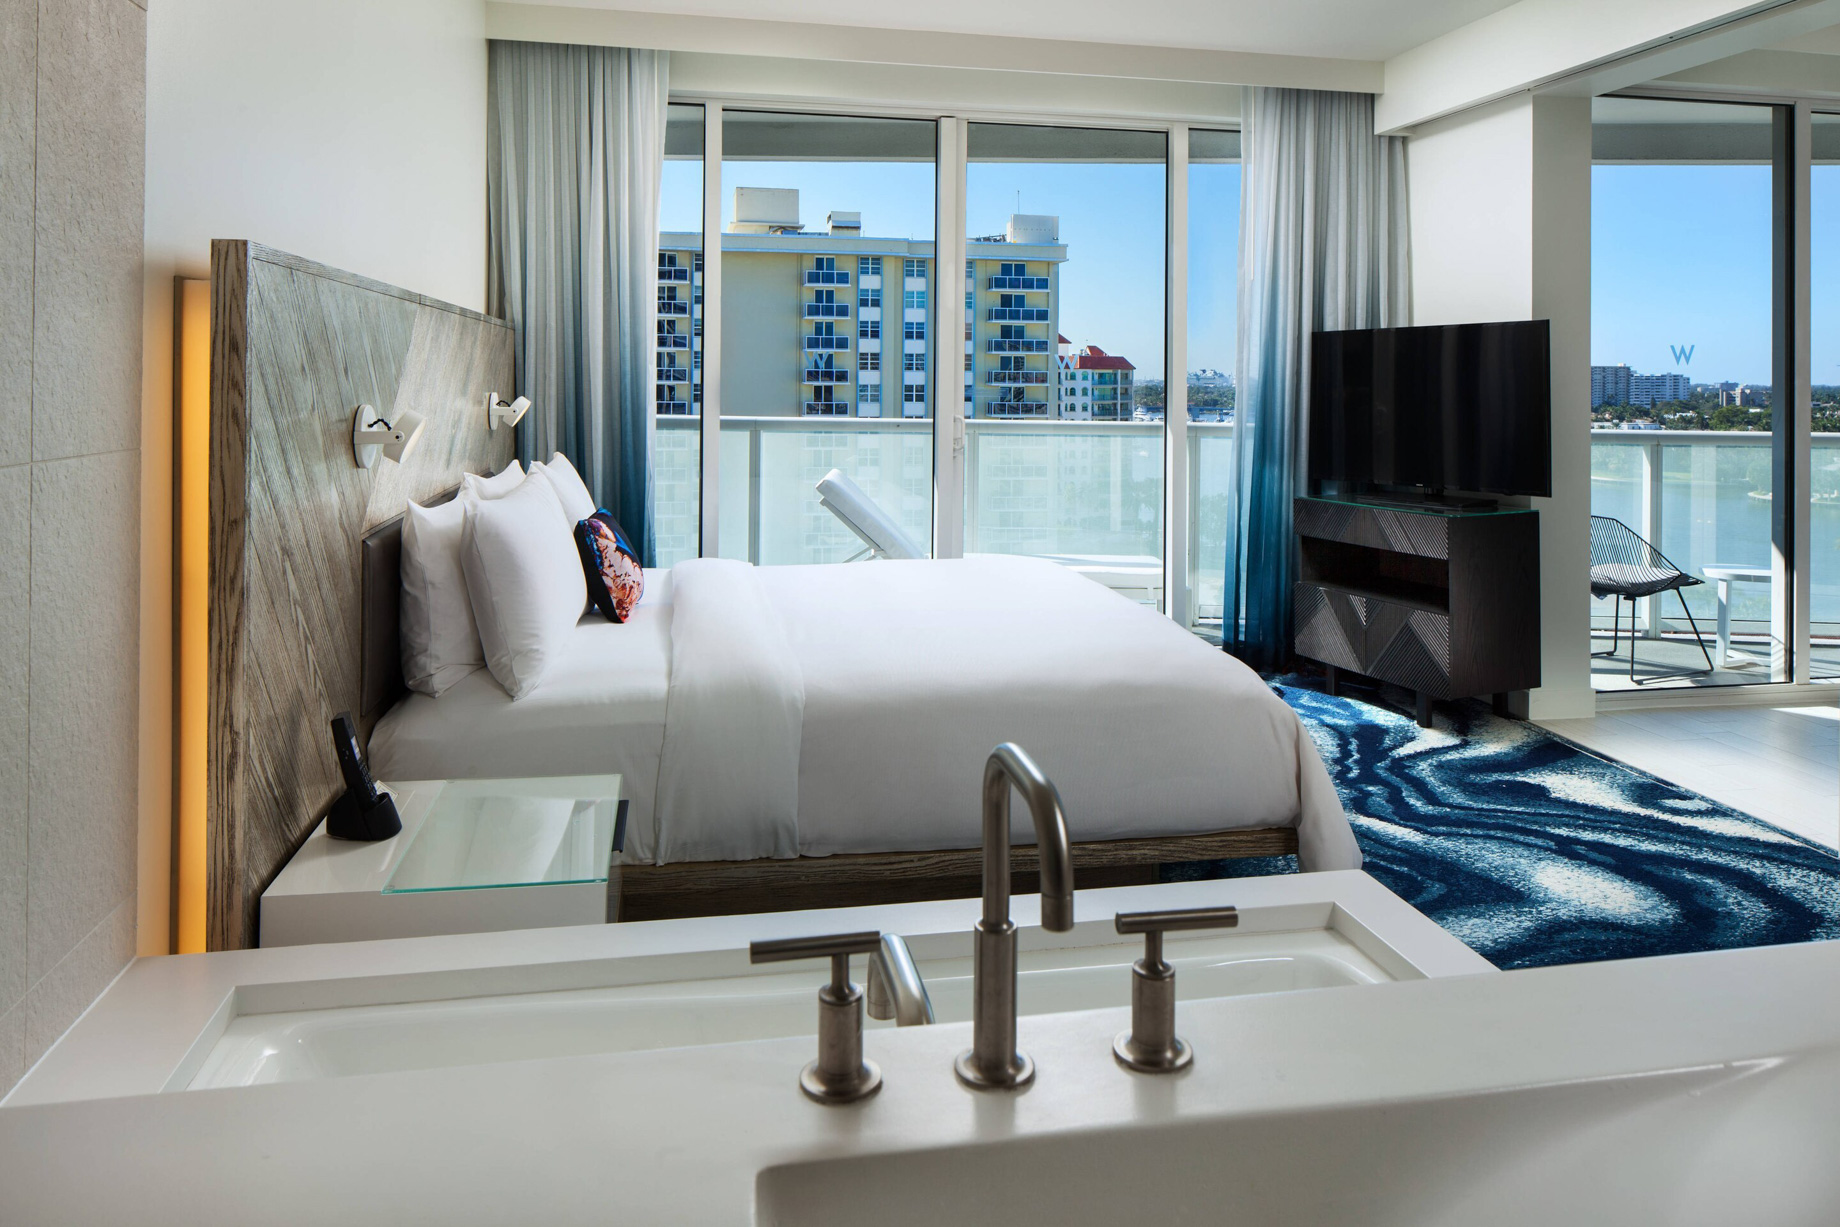 W Fort Lauderdale Hotel – Fort Lauderdale, FL, USA – Escape Residential Guest Room